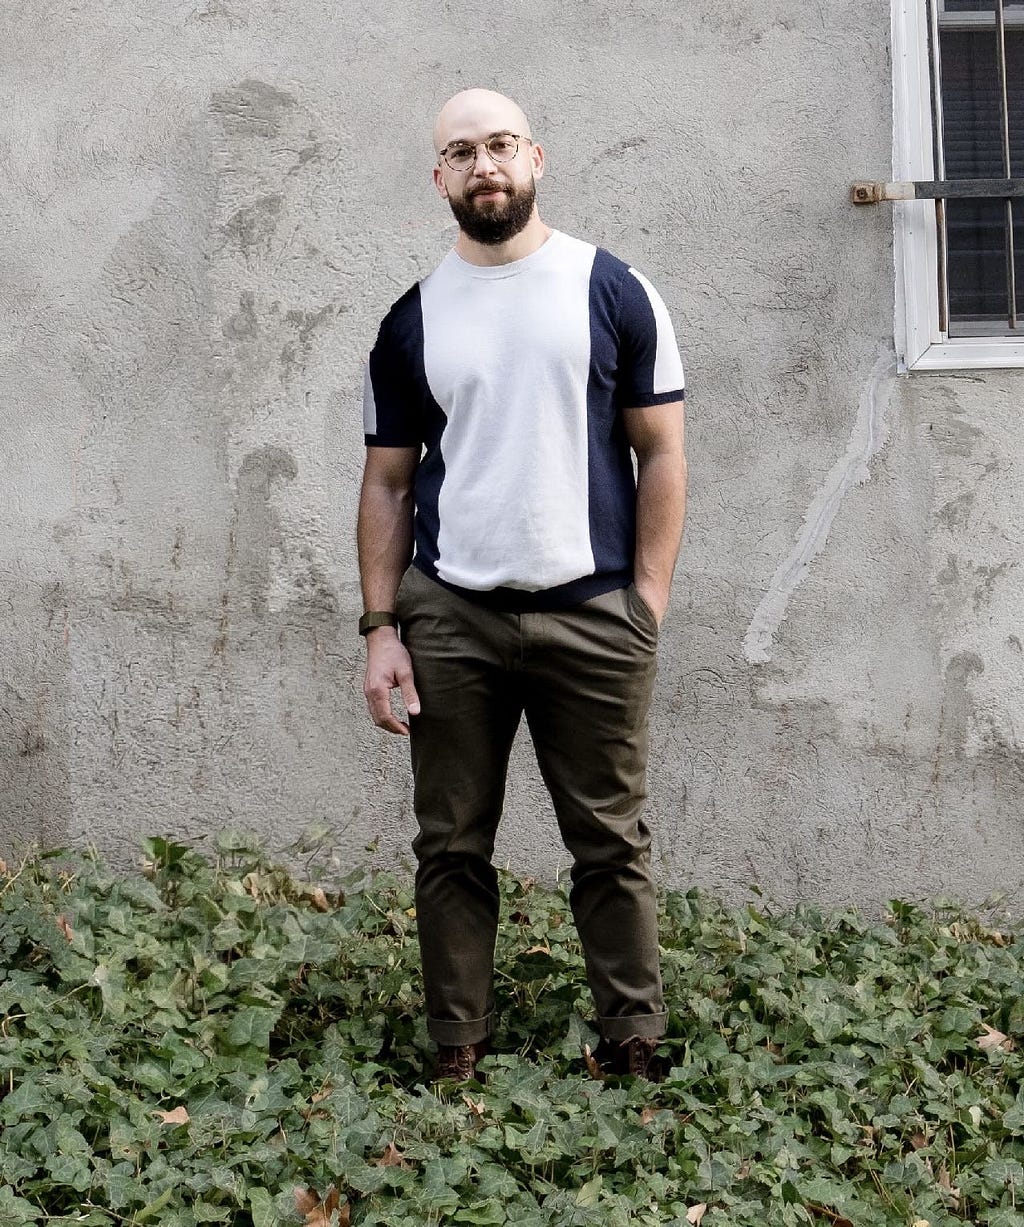 Félix stands outside on a sunny day, in ankle high greenery, in front of a gray wall. He is bald, with round glasses and a beard. He is wearing a navy and white striped shirt and army green pants, with his left hand in his pocket.